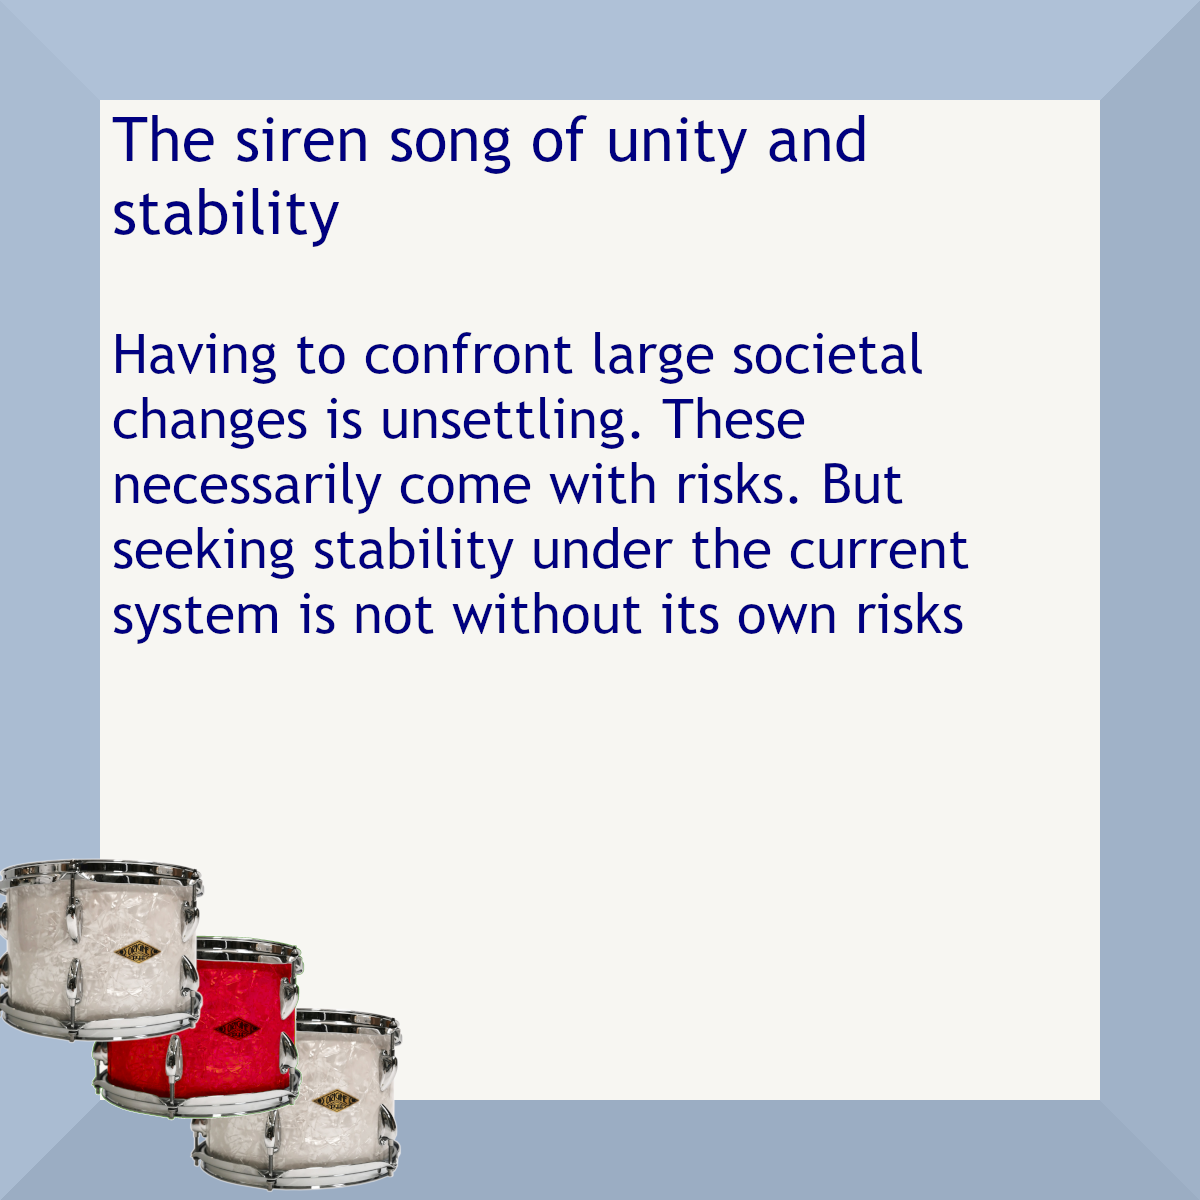 Blue border with three drums in one corner. Text: The siren song of unity and stability. Having to confront large societal changes is unsettling. These necessarily come with risks. But seeking stability under the current system is not without its own risks